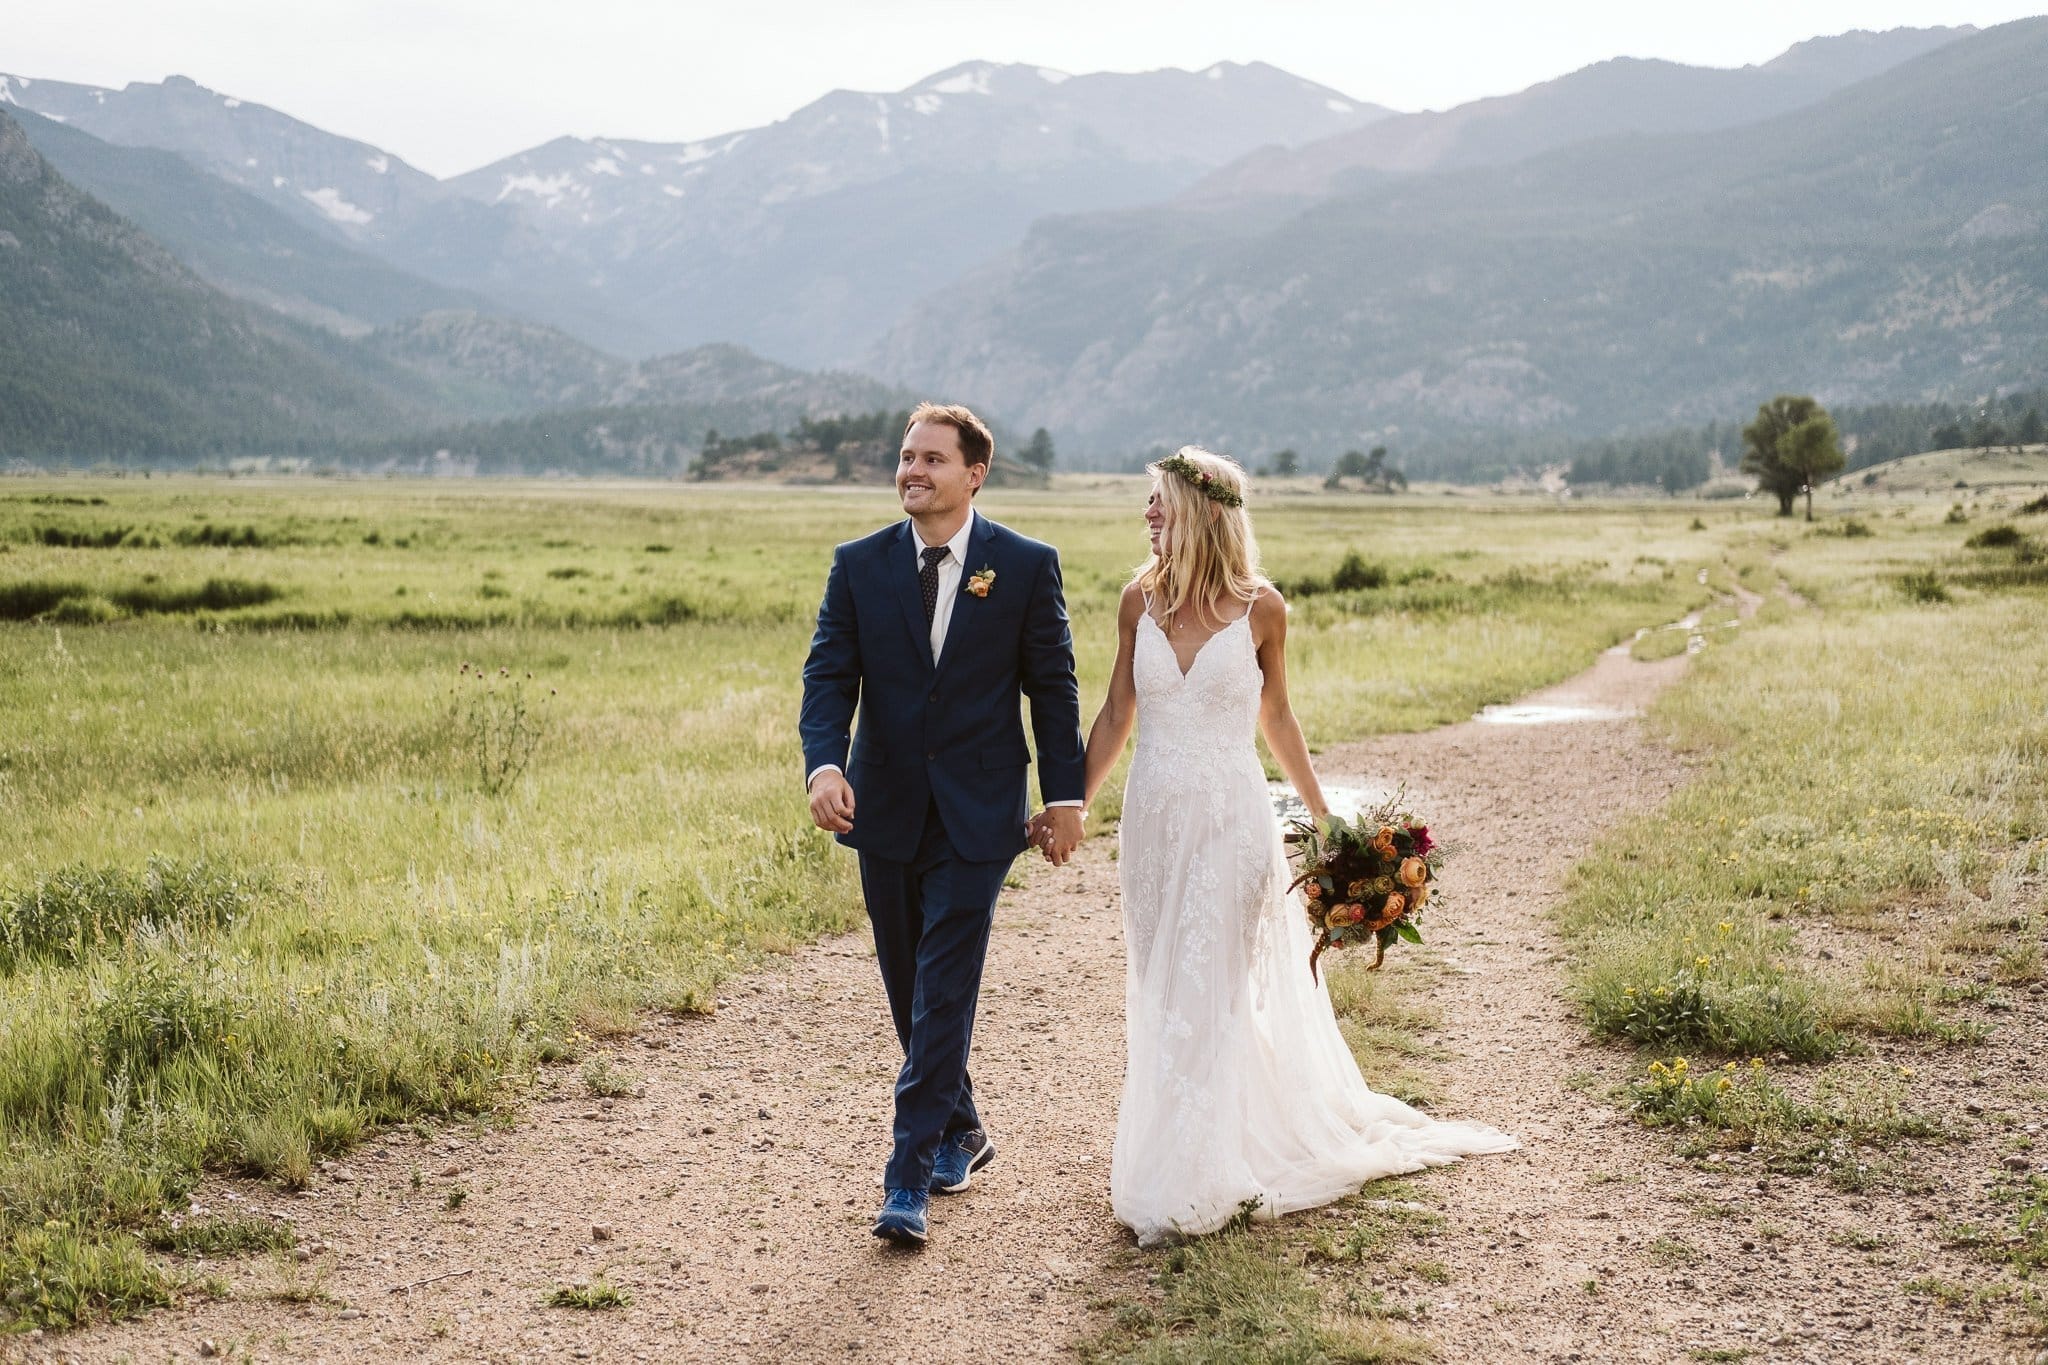 Bride and groom hiking in Moraine Valley for Rocky Mountain National Park elopement, Colorado elopement photographer, adventure elopement